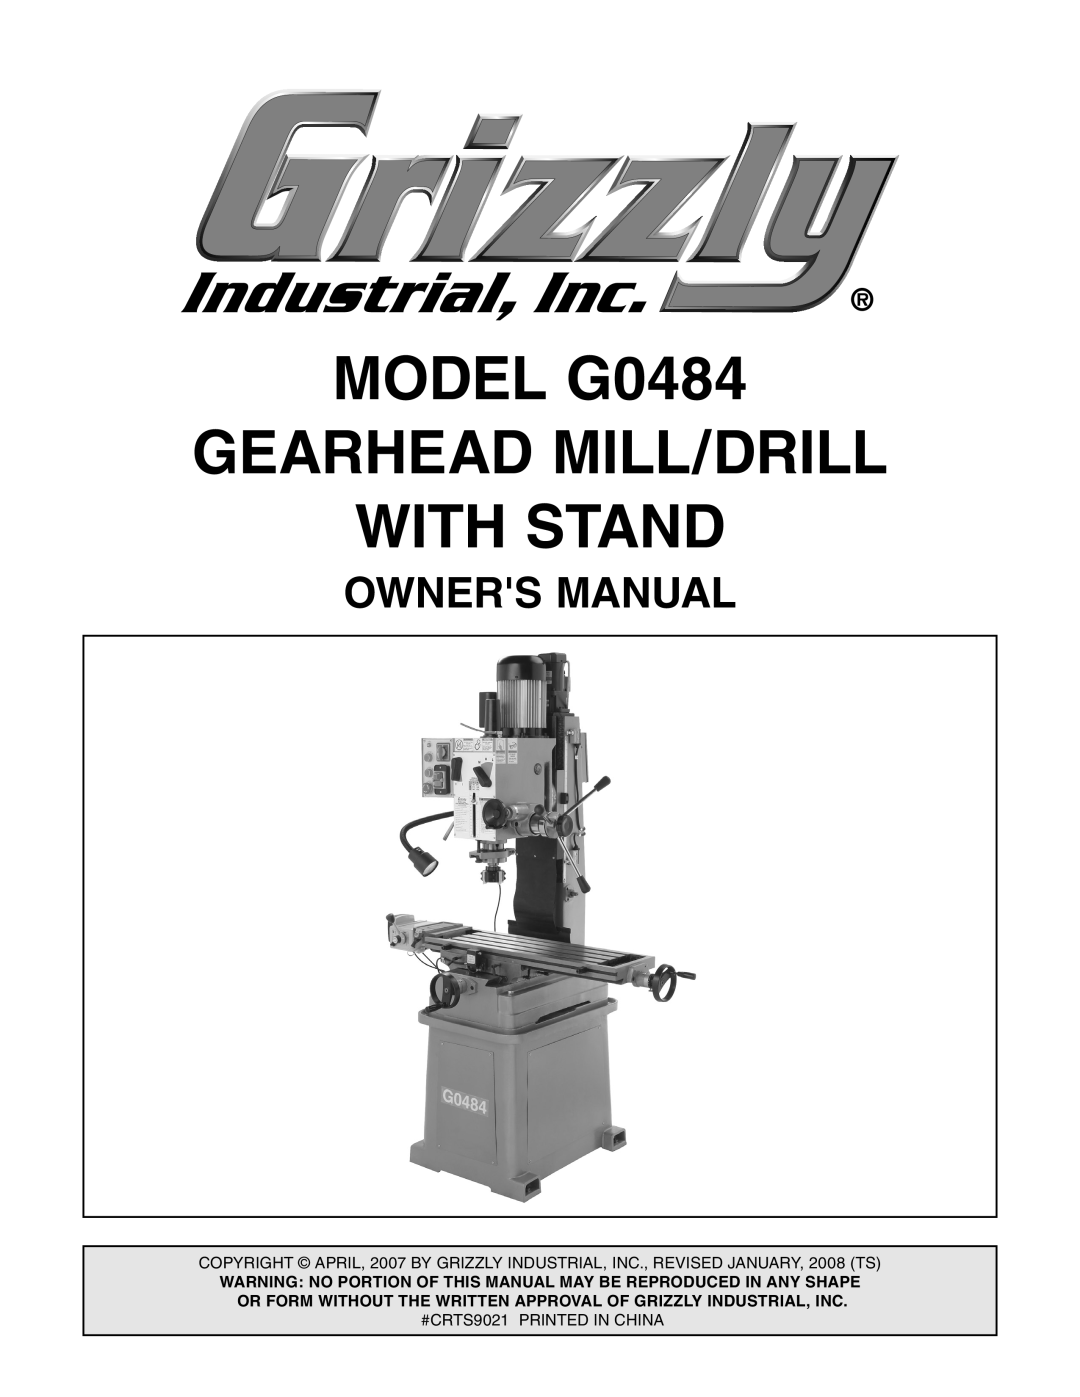 Grizzly owner manual MODEL G0484 GEARHEAD MILL/DRILL WITH STAND 